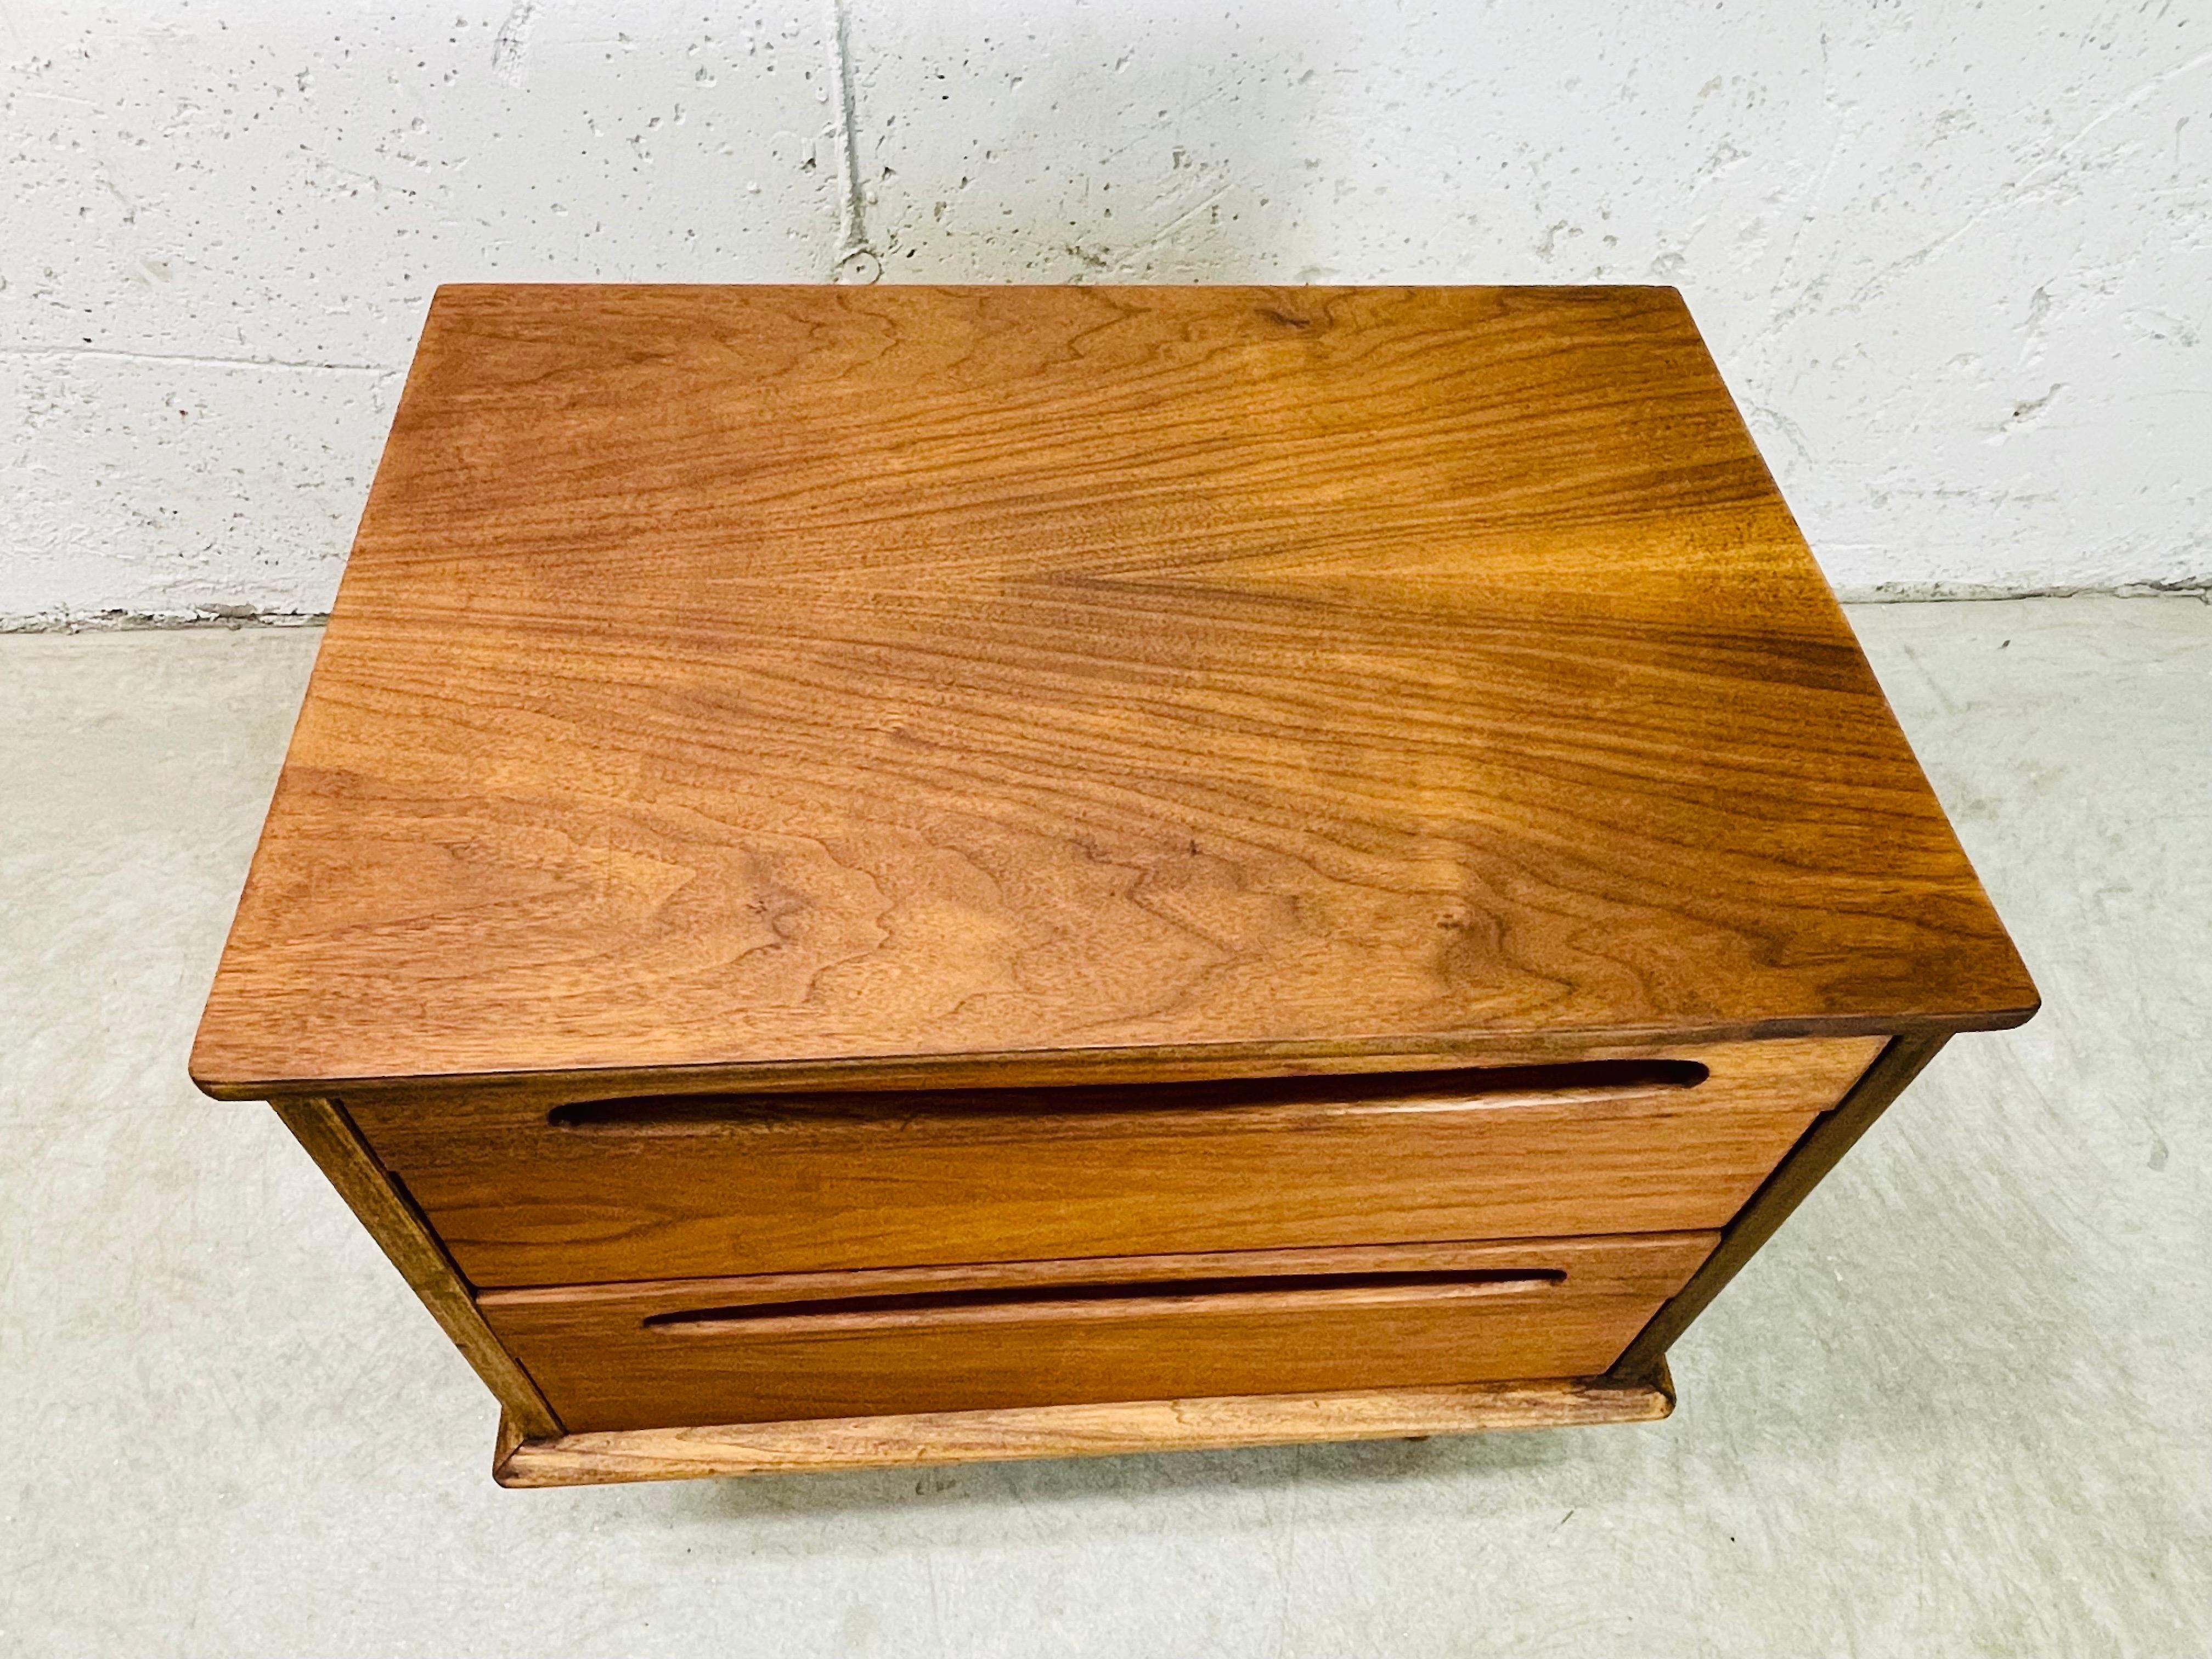 Vintage 1960s solid walnut nightstand by American of Martinsville. The nightstand has two drawers for storage and round turned legs. The drawers are 4.5”H. Marked in the drawer.